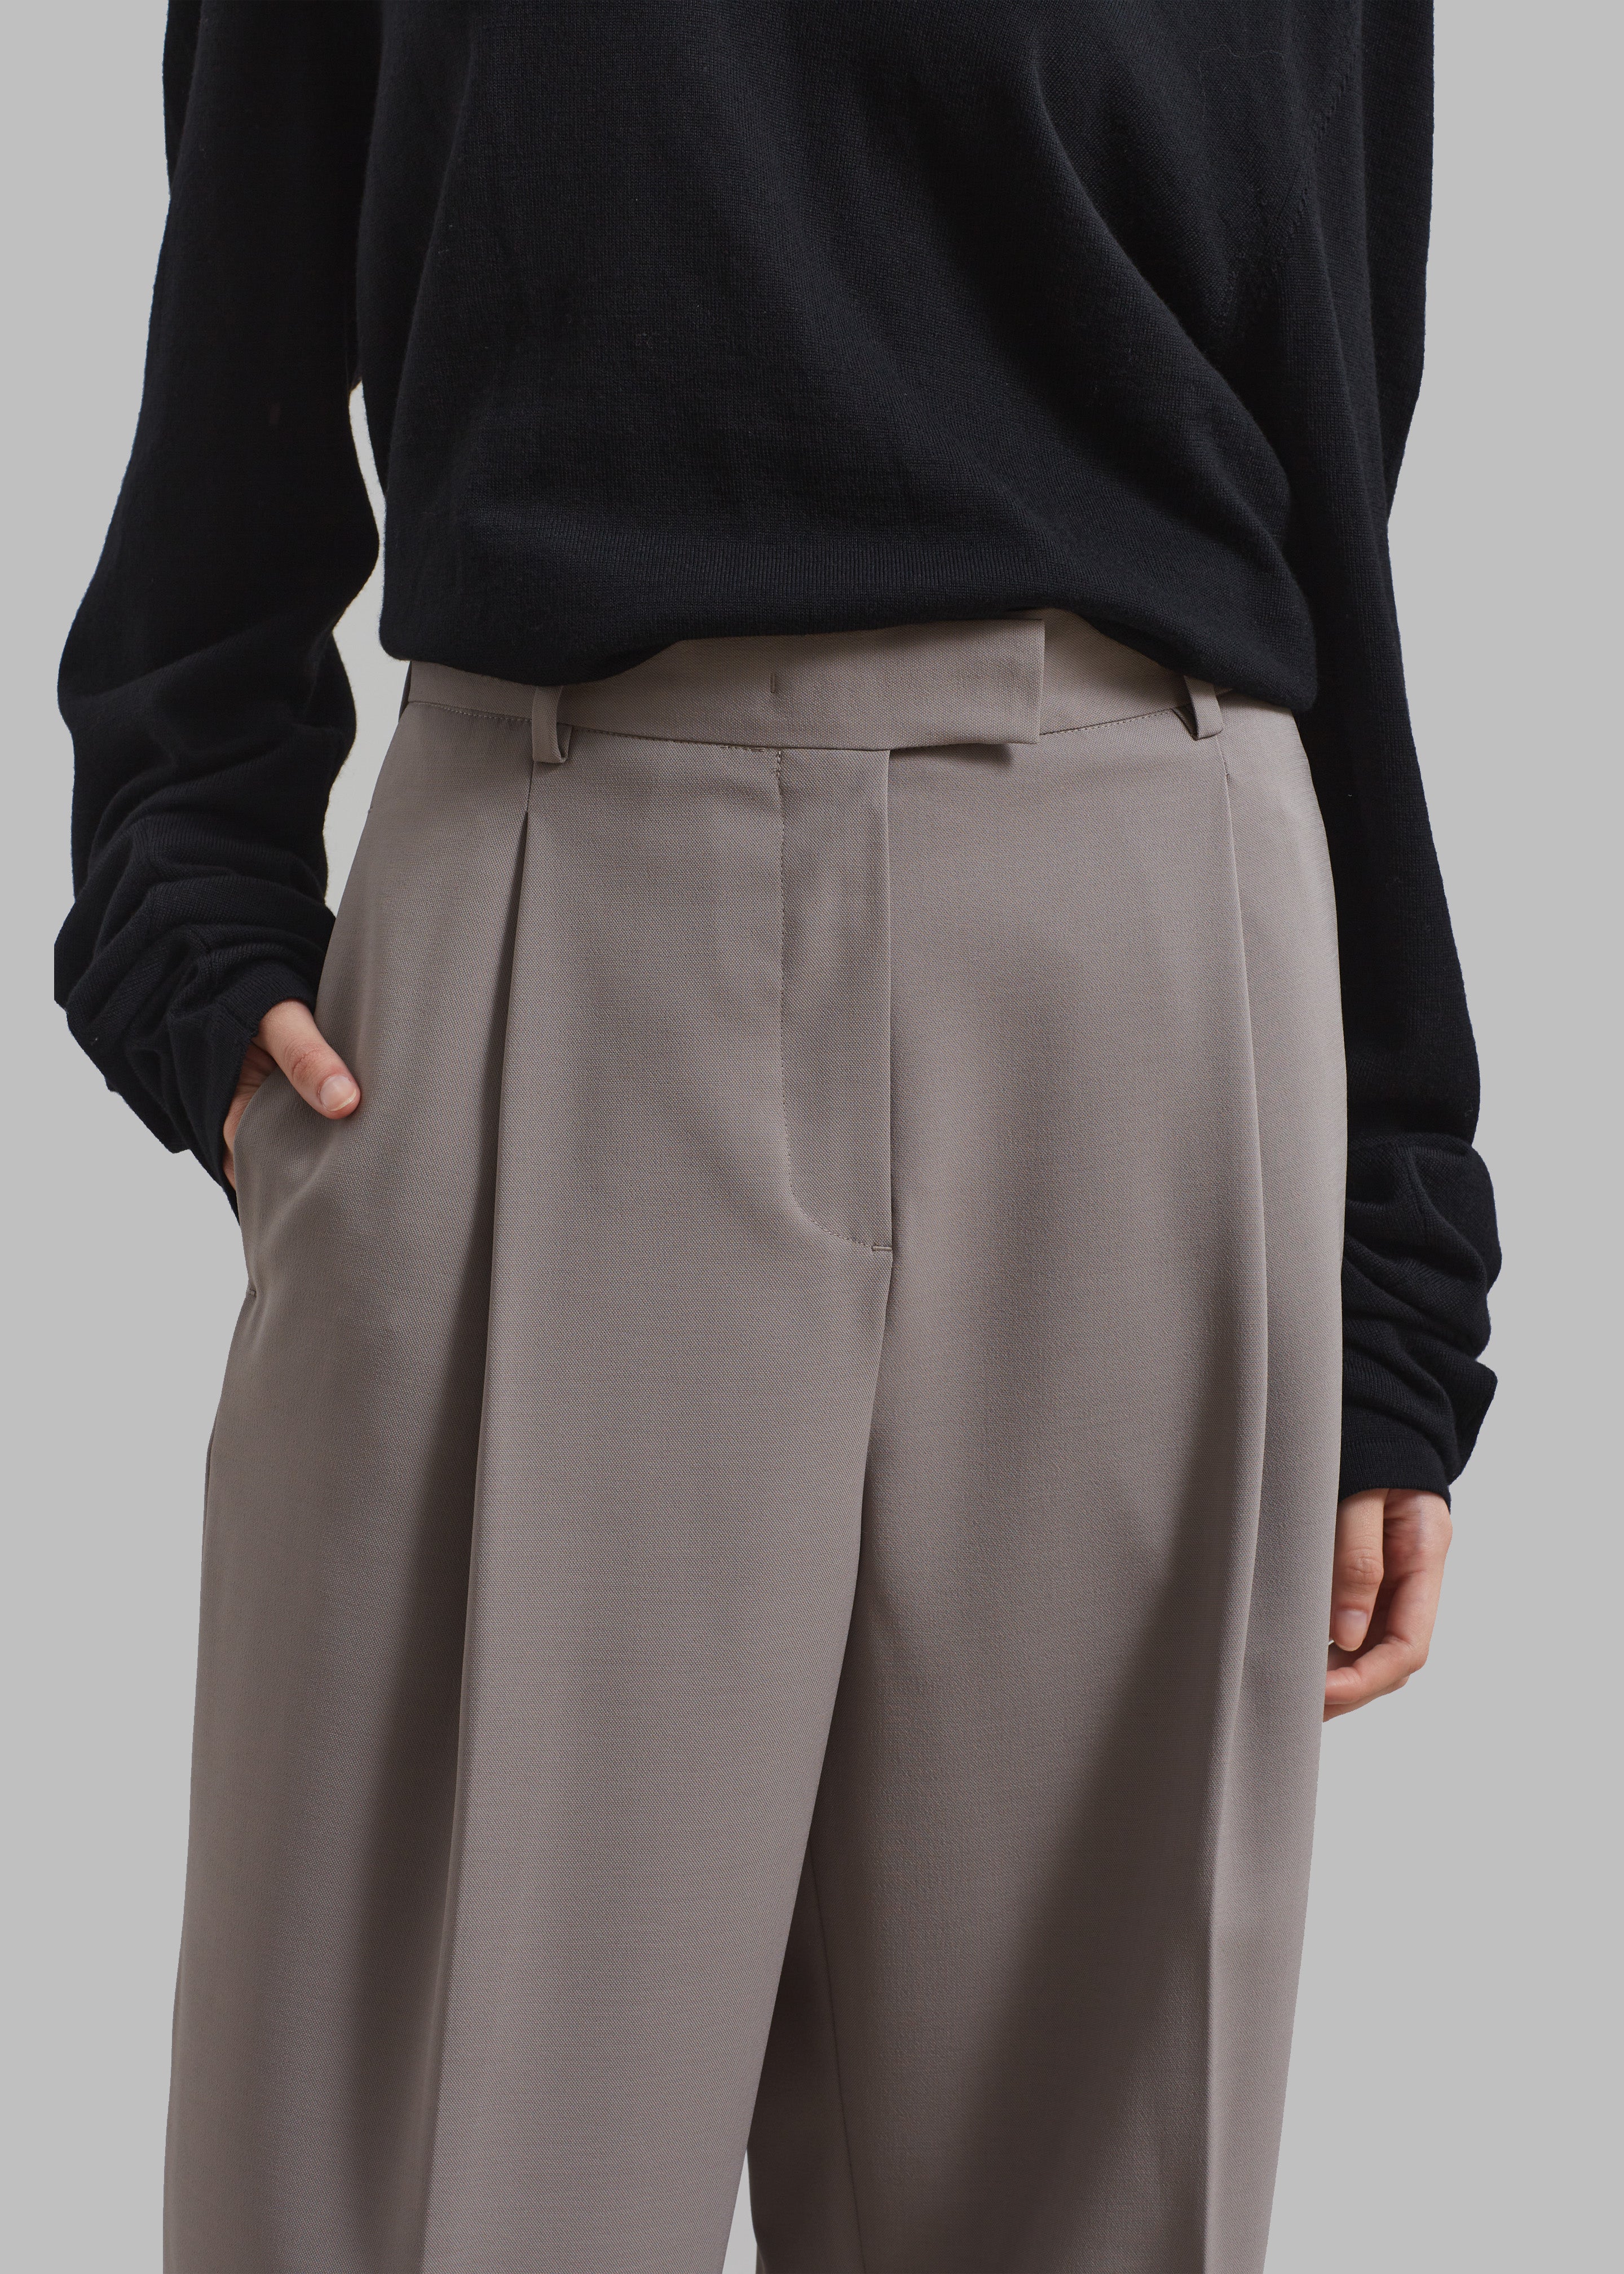 Quinnie Trousers - Grey - 7